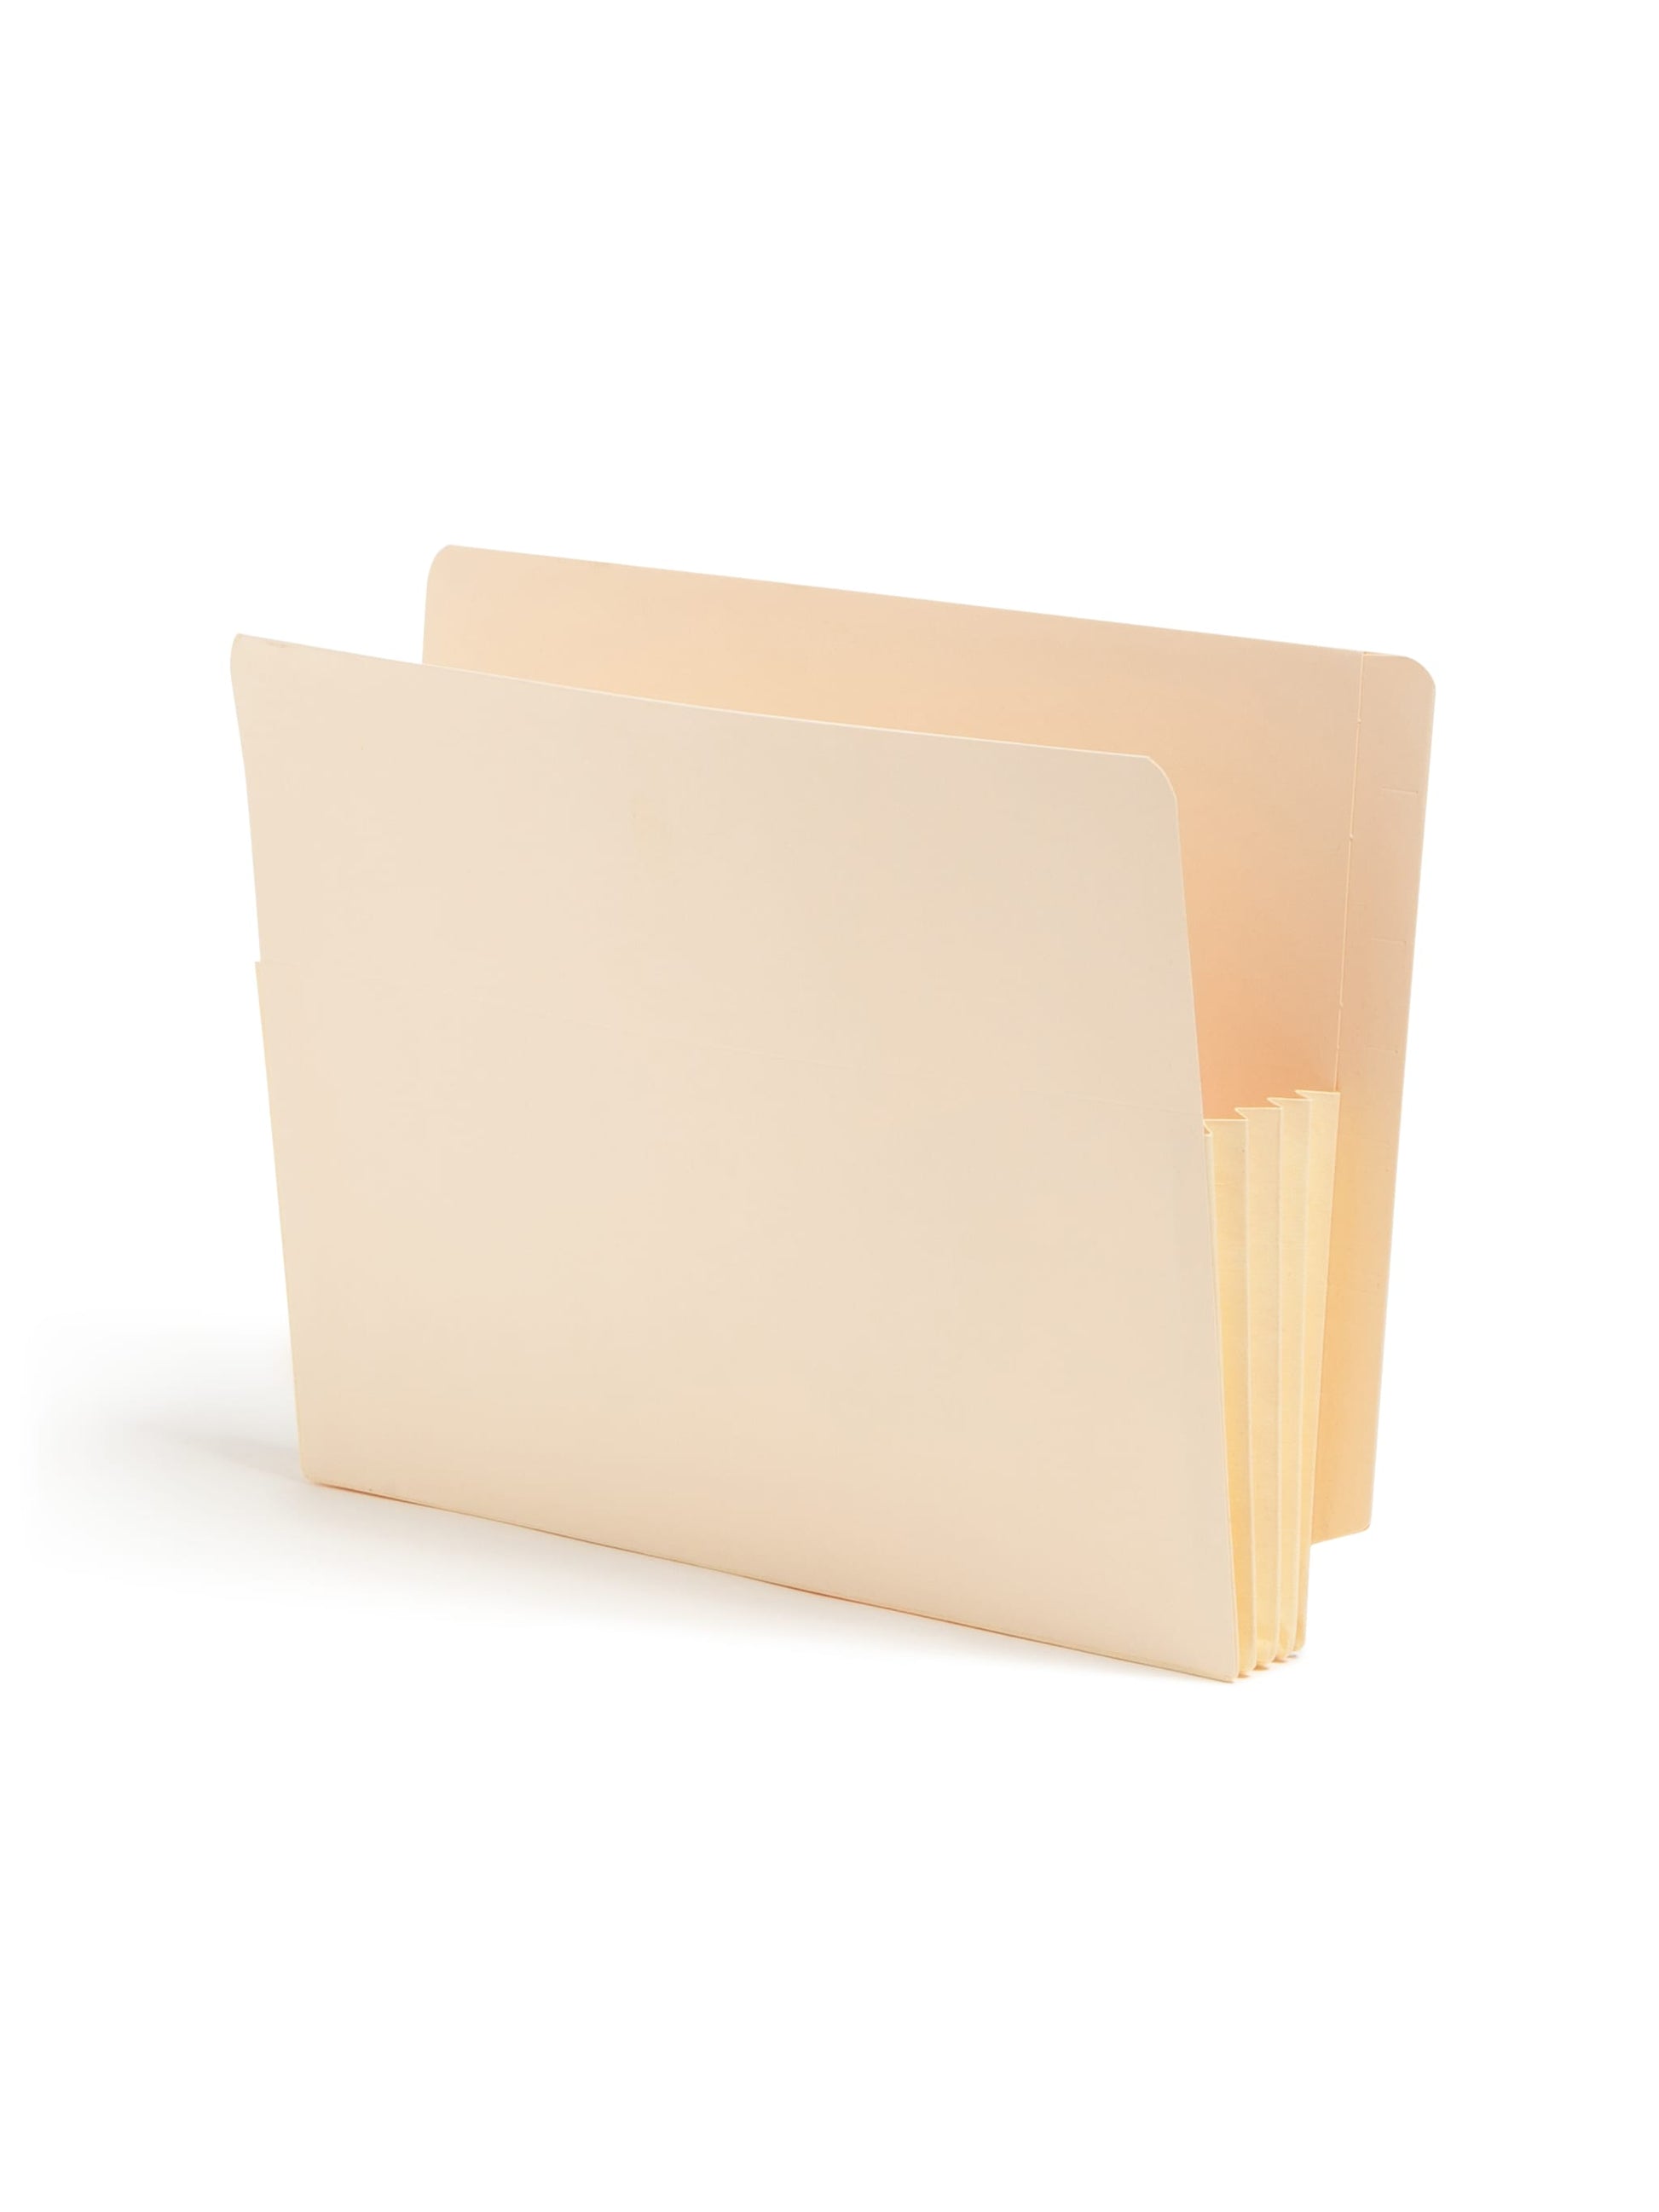 Reinforced End Tab File Pockets, Straight-Cut Tab, 3-1/2 inch Expansion, Manila Color, Letter Size, Set of 0, 30086486751644